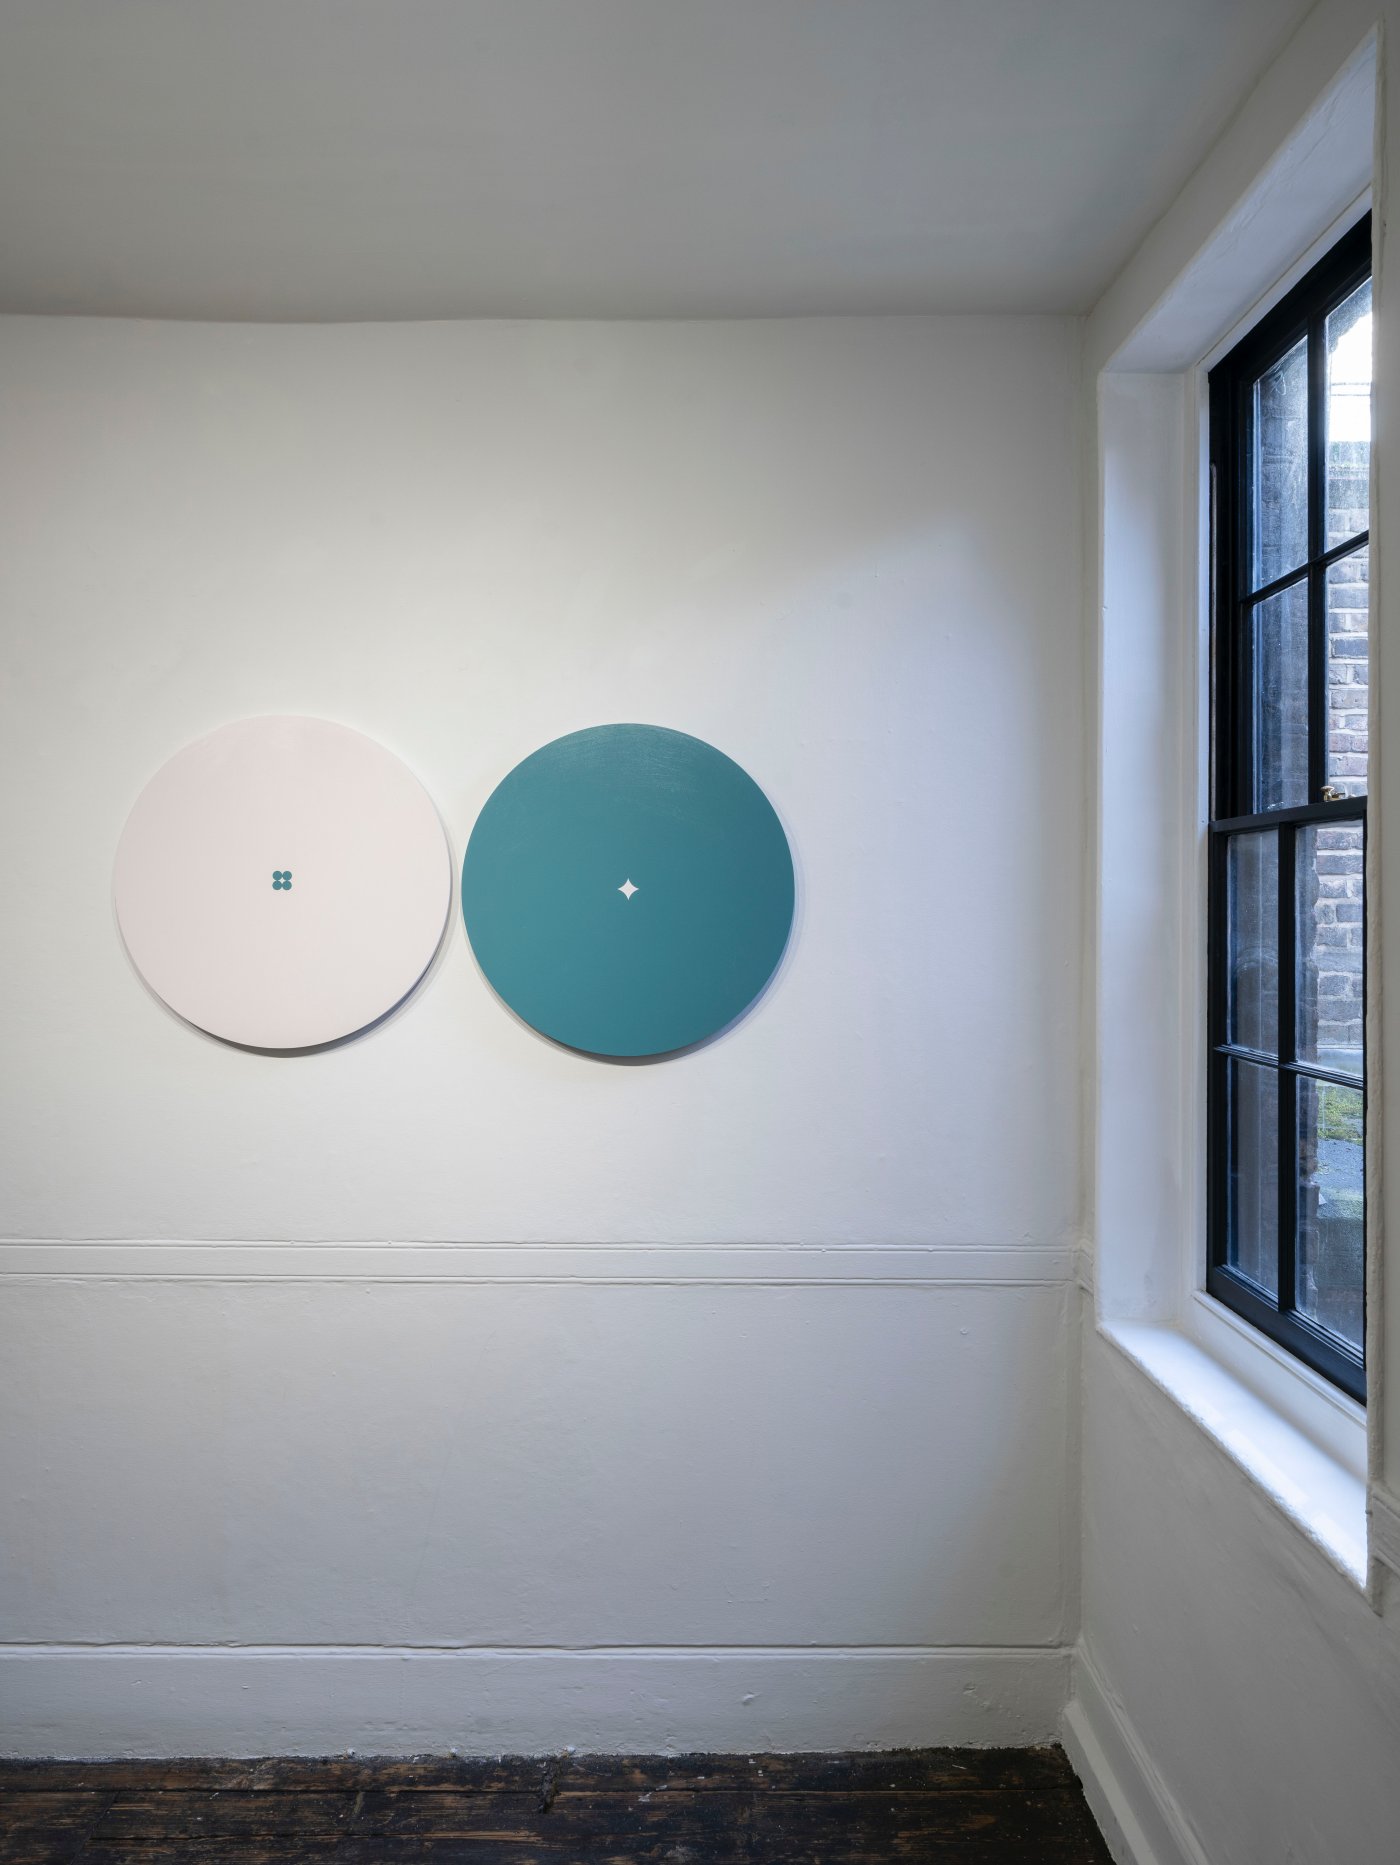 Installation image for Tess Jaray: For Your Eyes Only, at Karsten Schubert